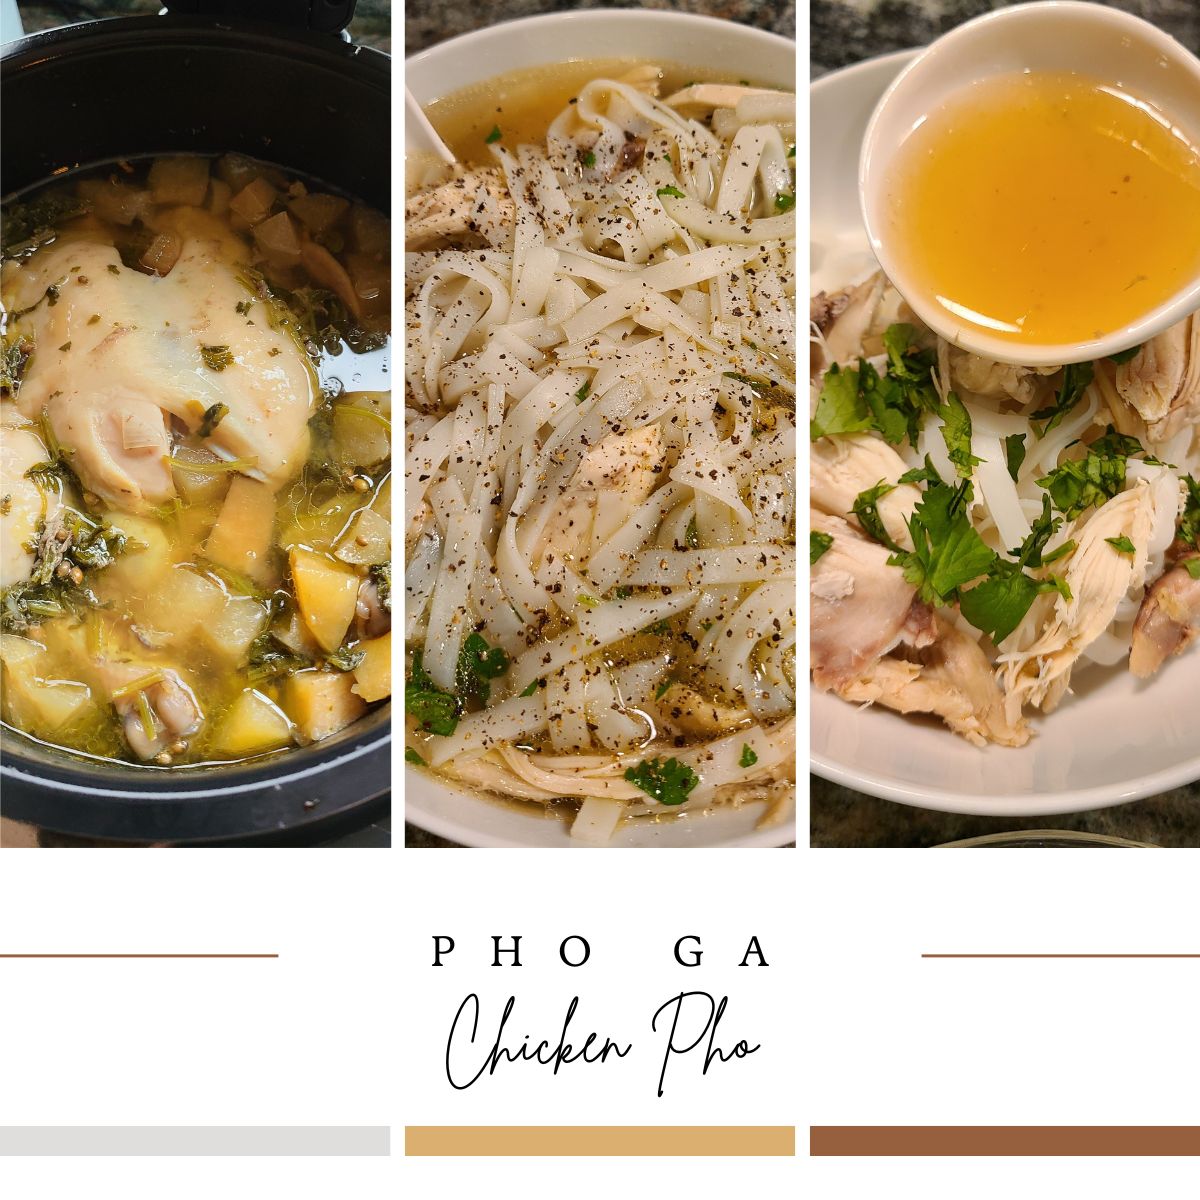 a collage showing bowls of chicken pho to illustrate pho ga calories